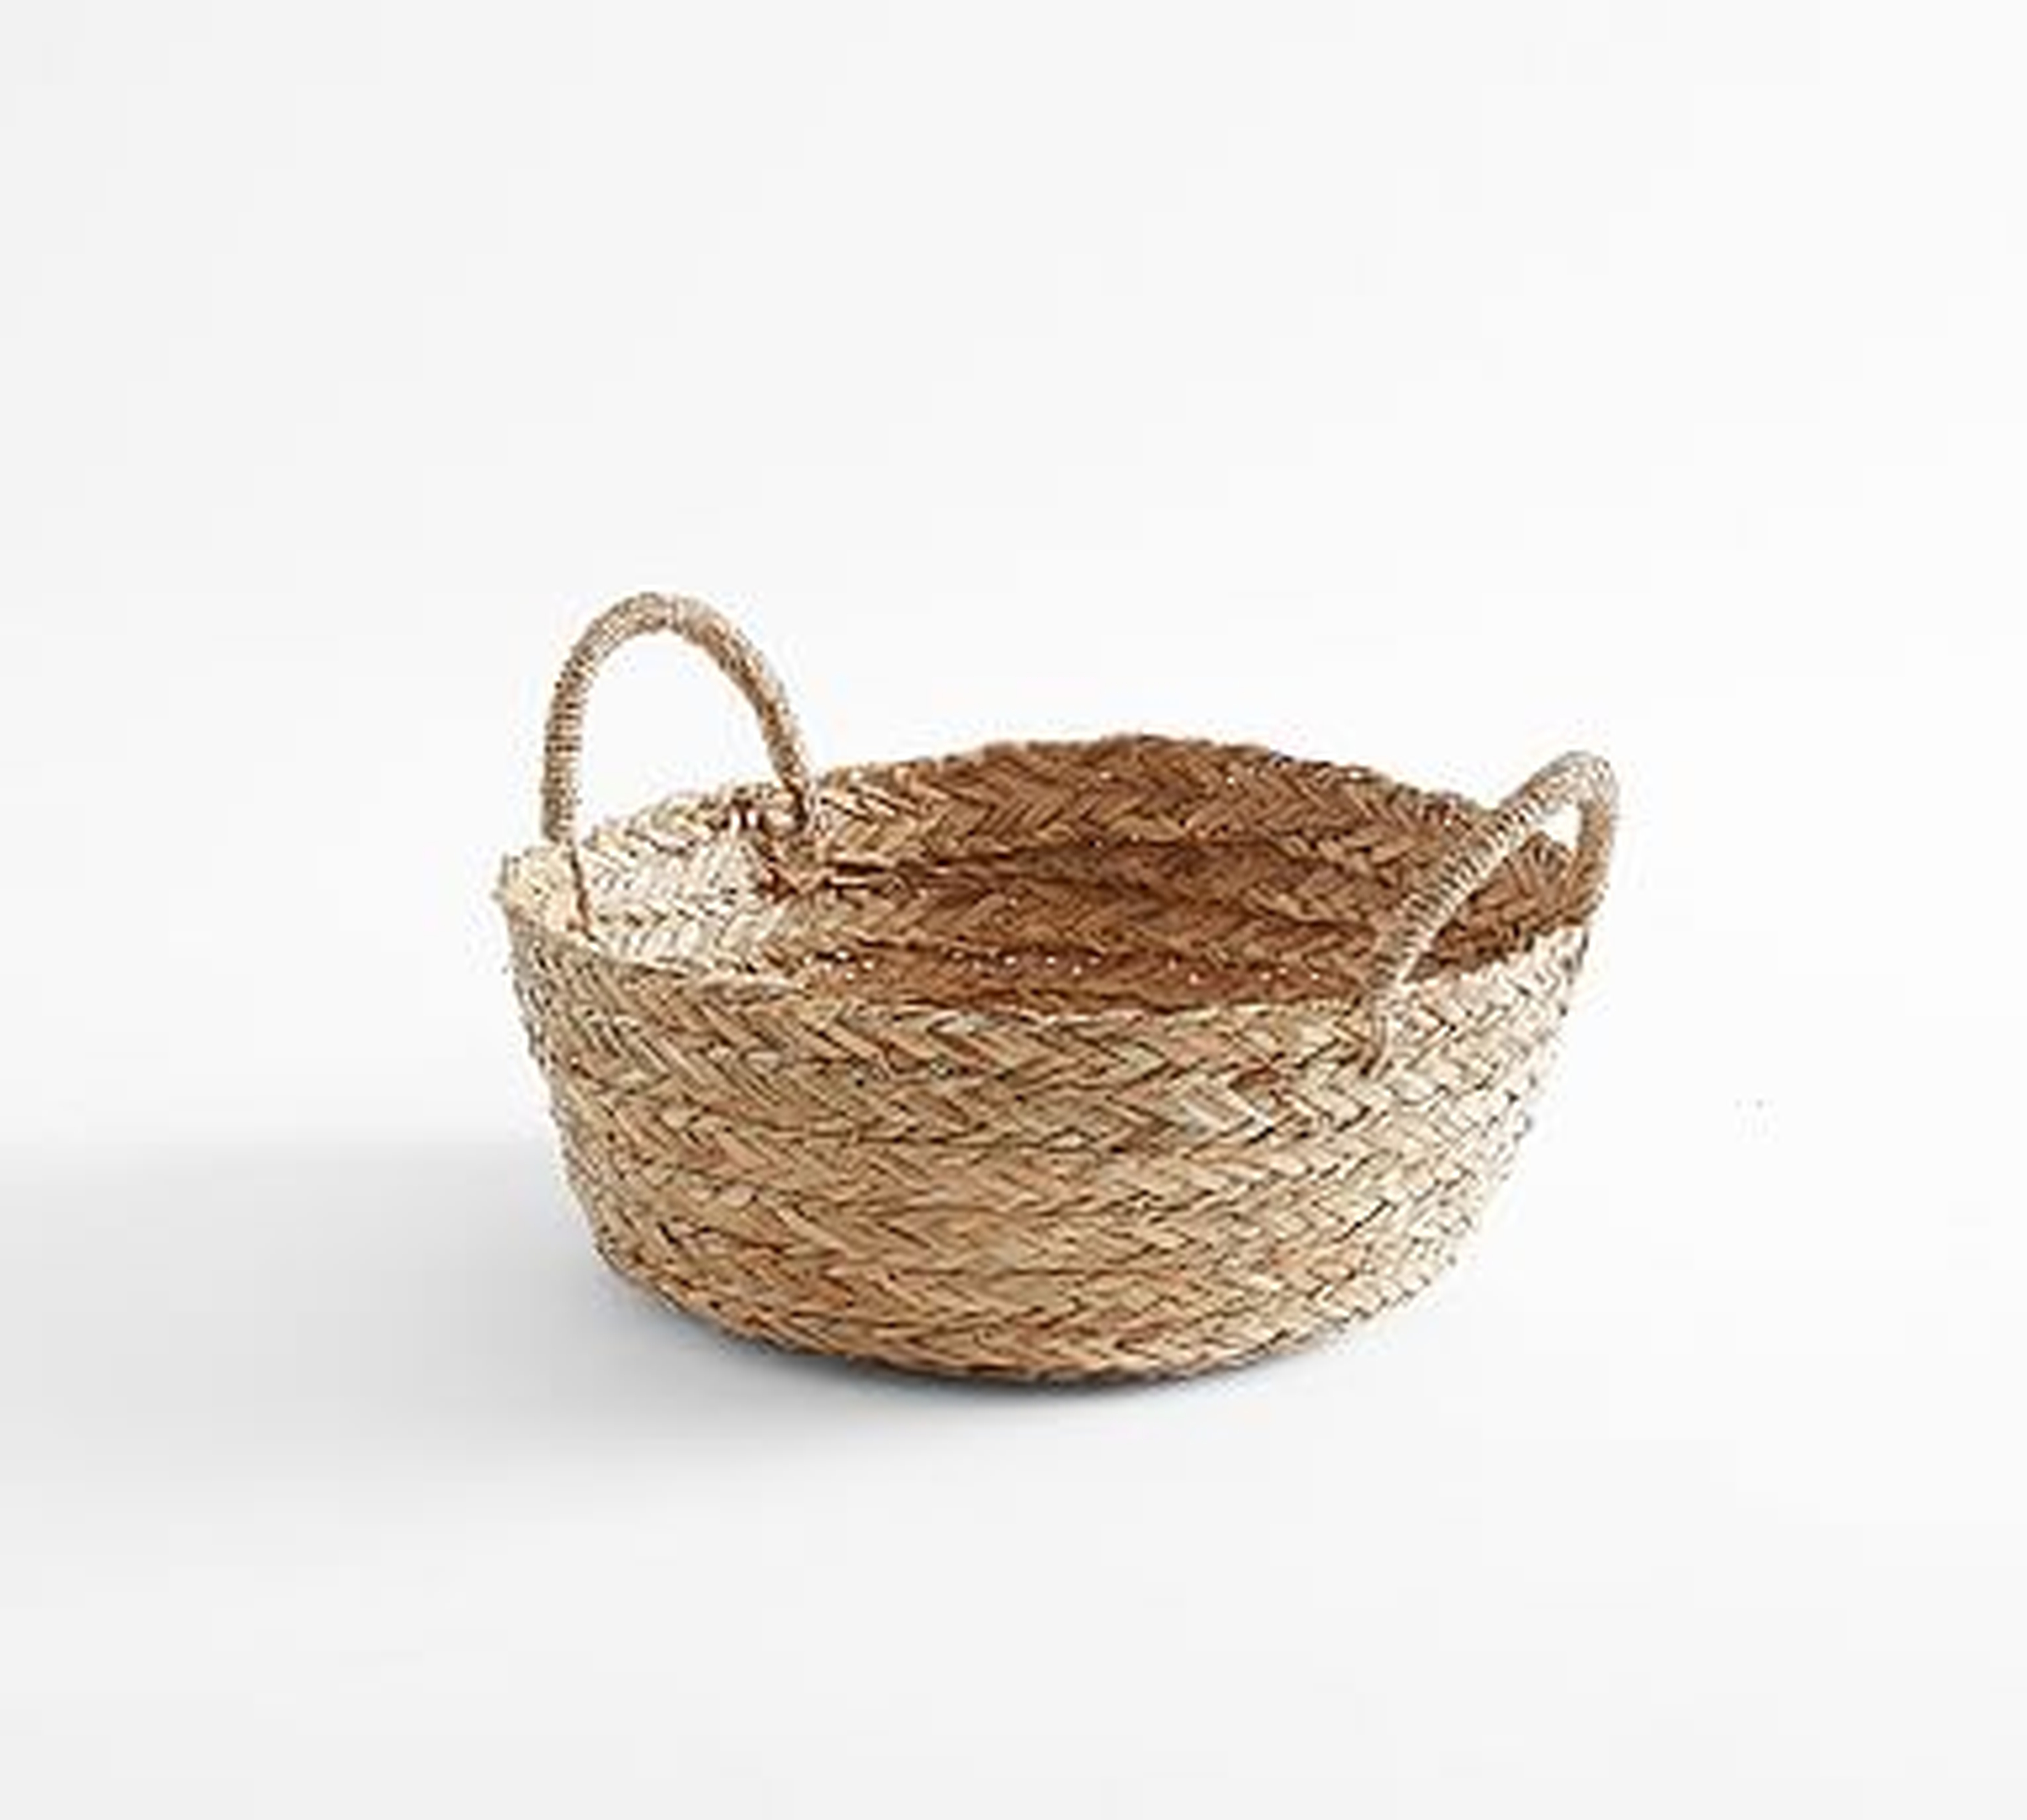 Moroccan Woven Tote Basket, Low - Pottery Barn